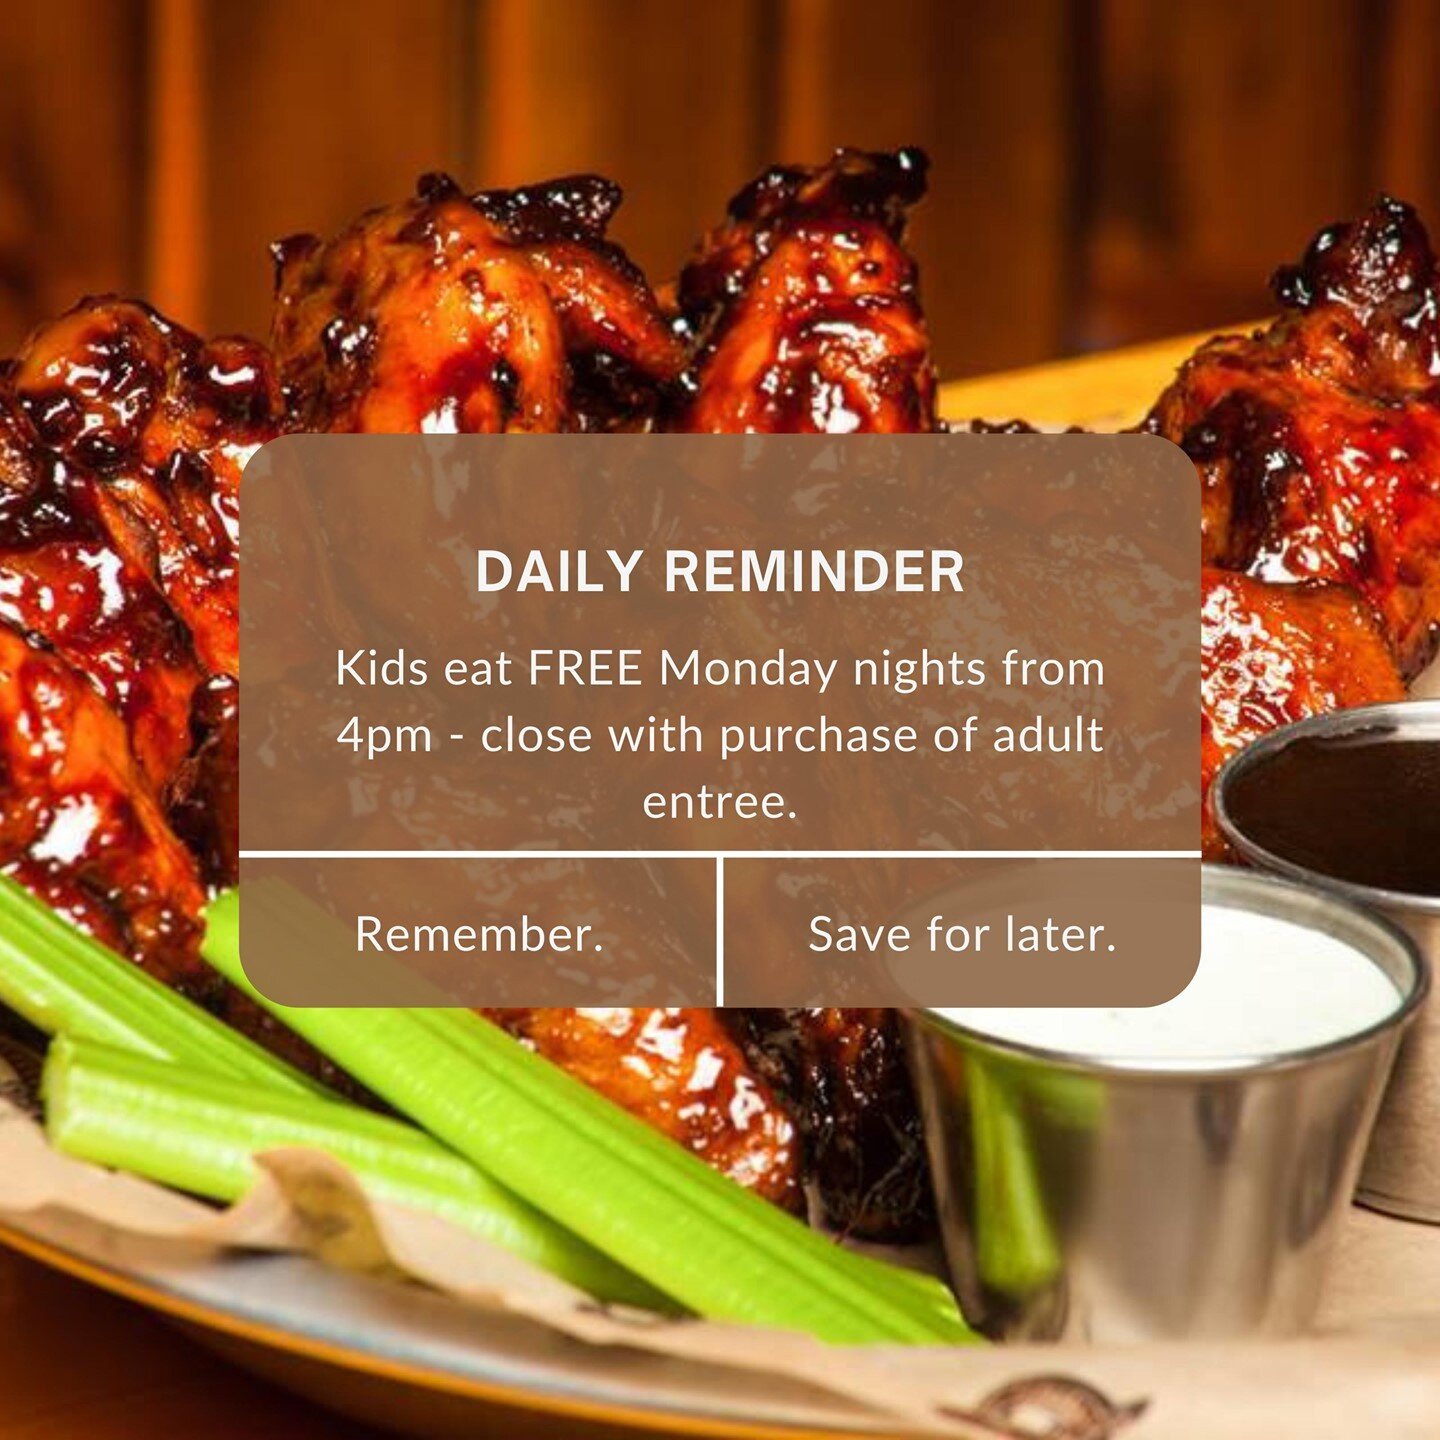 Kids eat FREE on Monday nights with an adult entr&eacute;e purchase. Avaialble from 4pm-close.